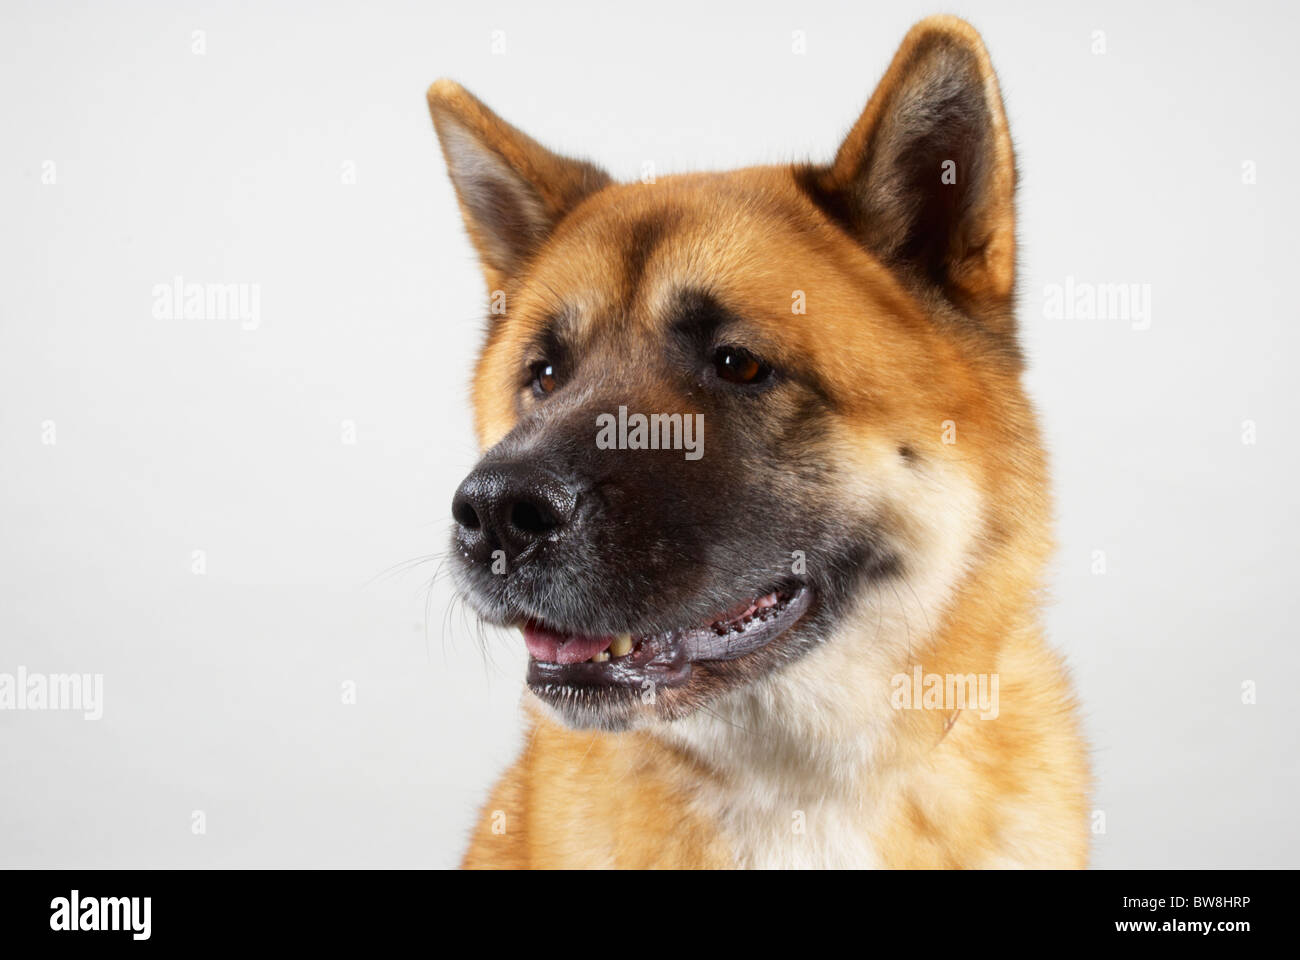 Japanese Akita called Kendo (aged 4 years old). Stock Photo